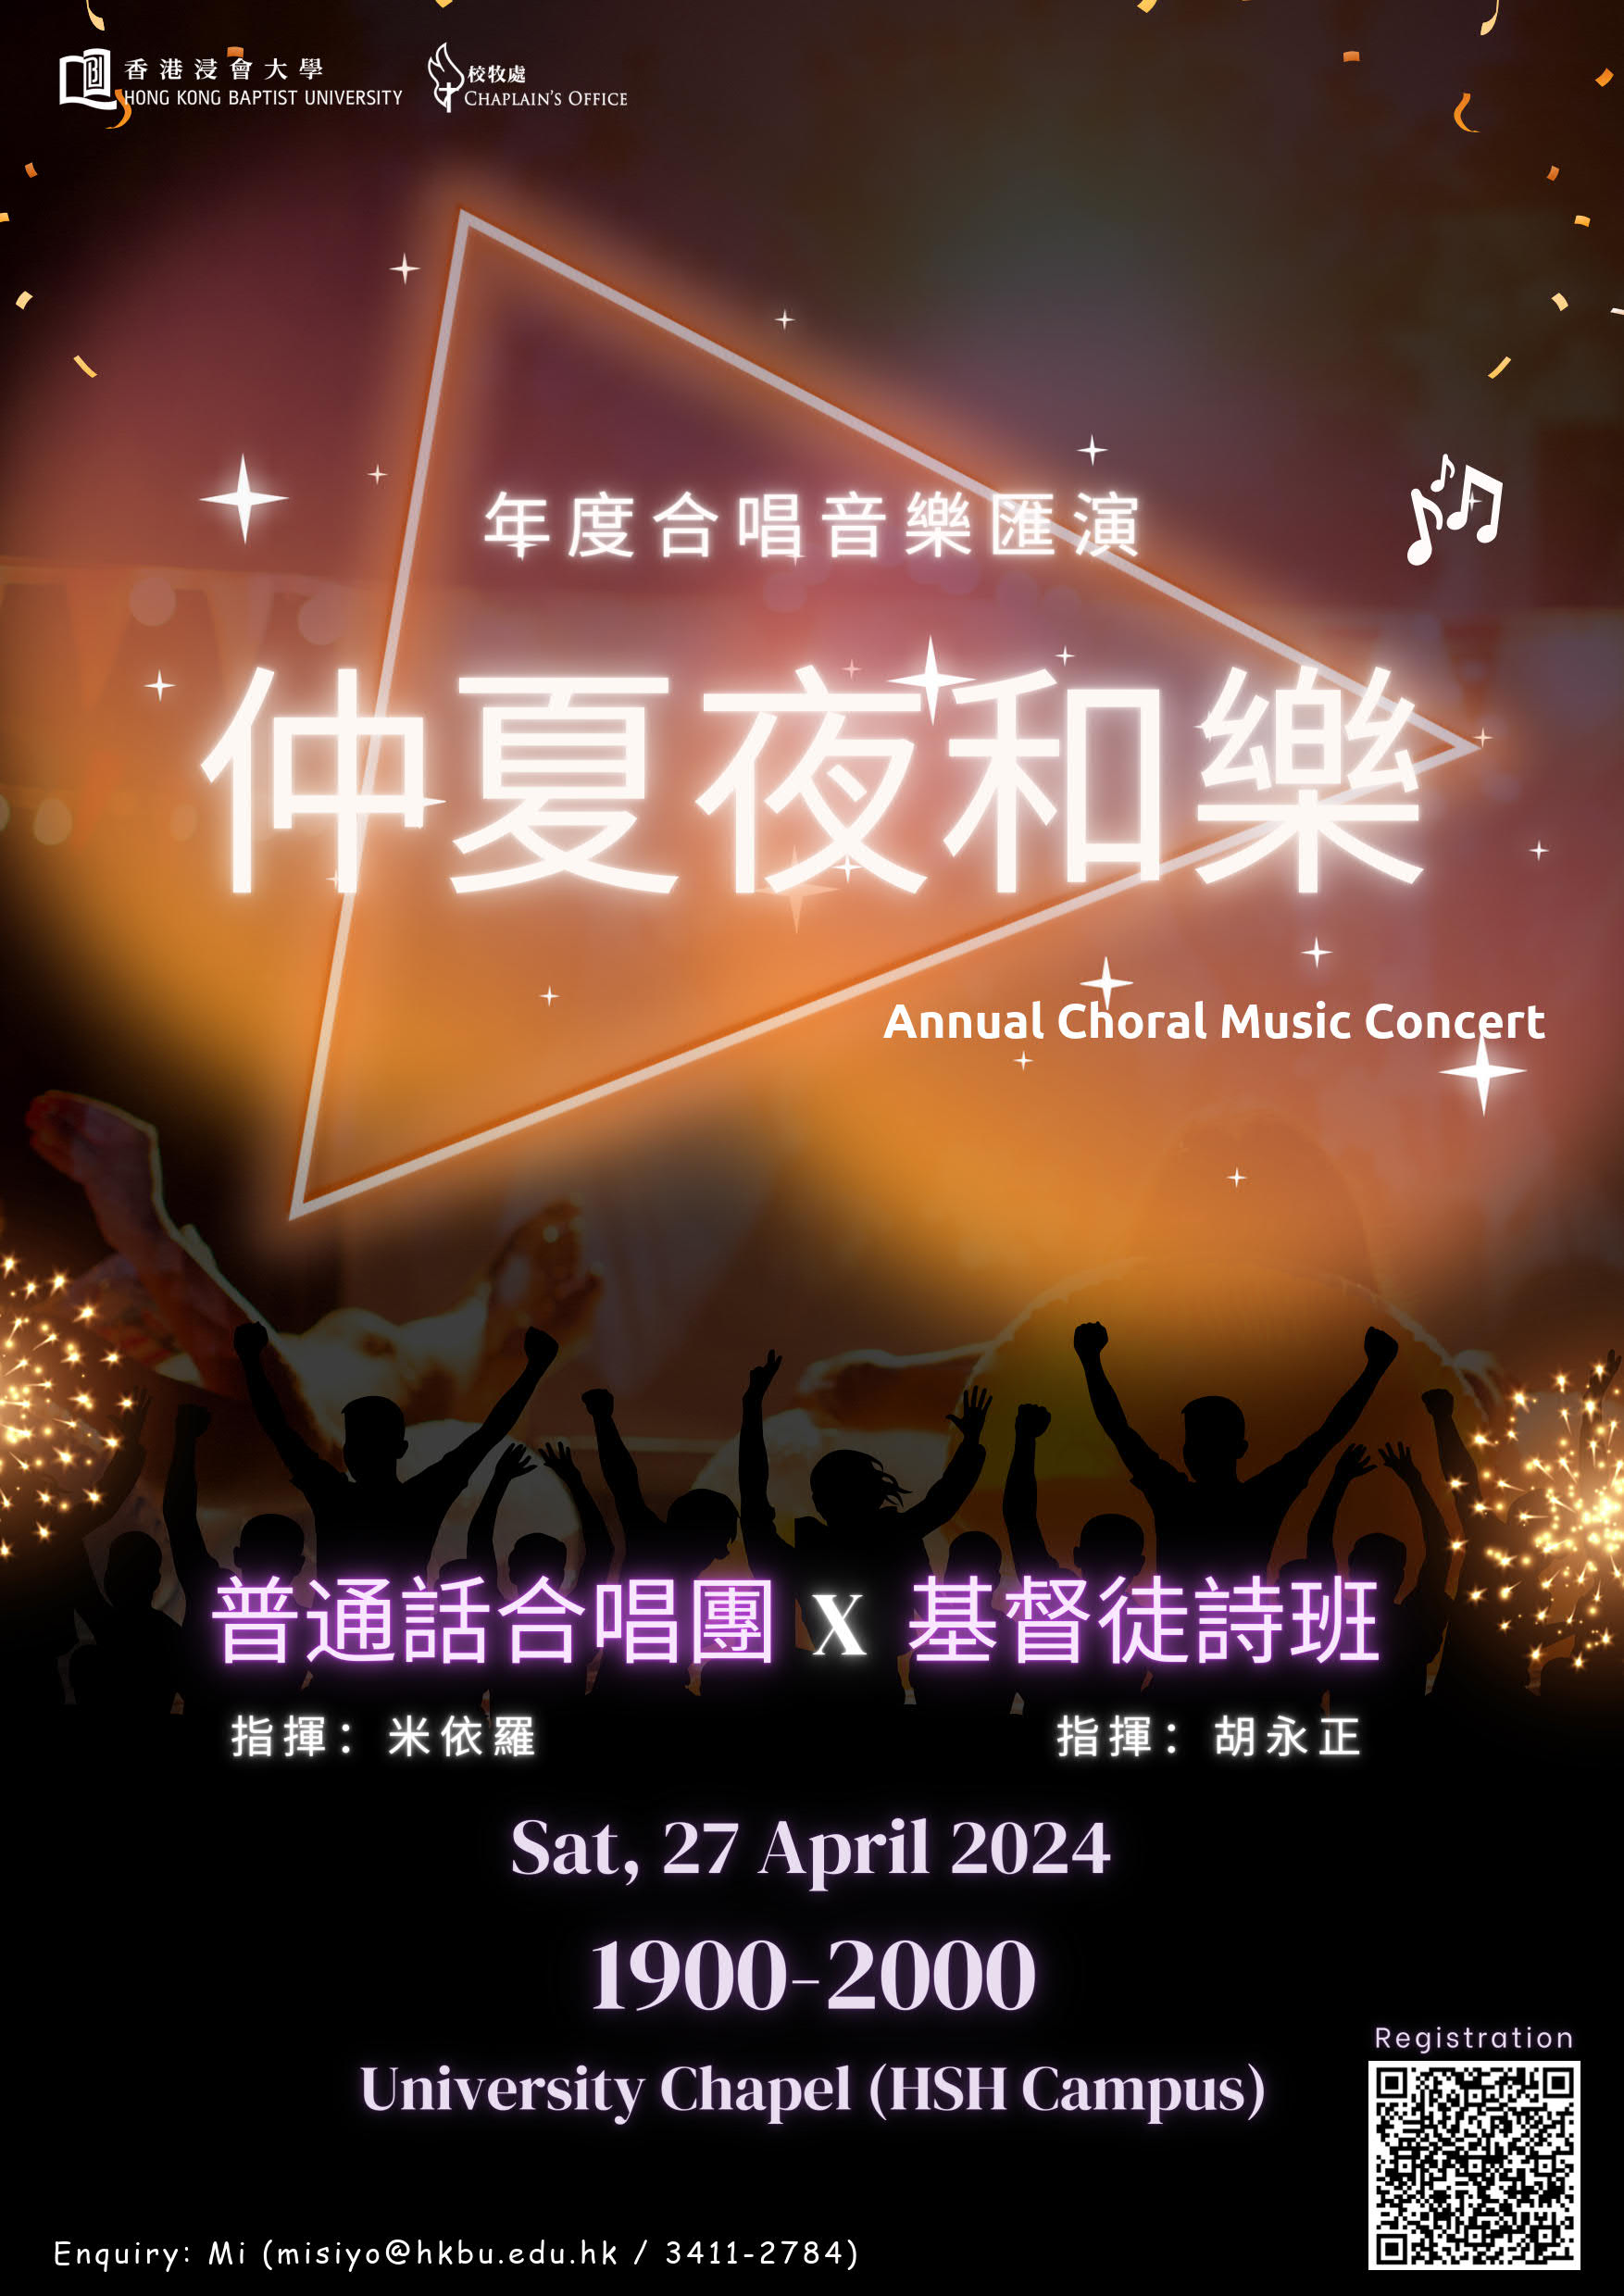 Choral Music Concert